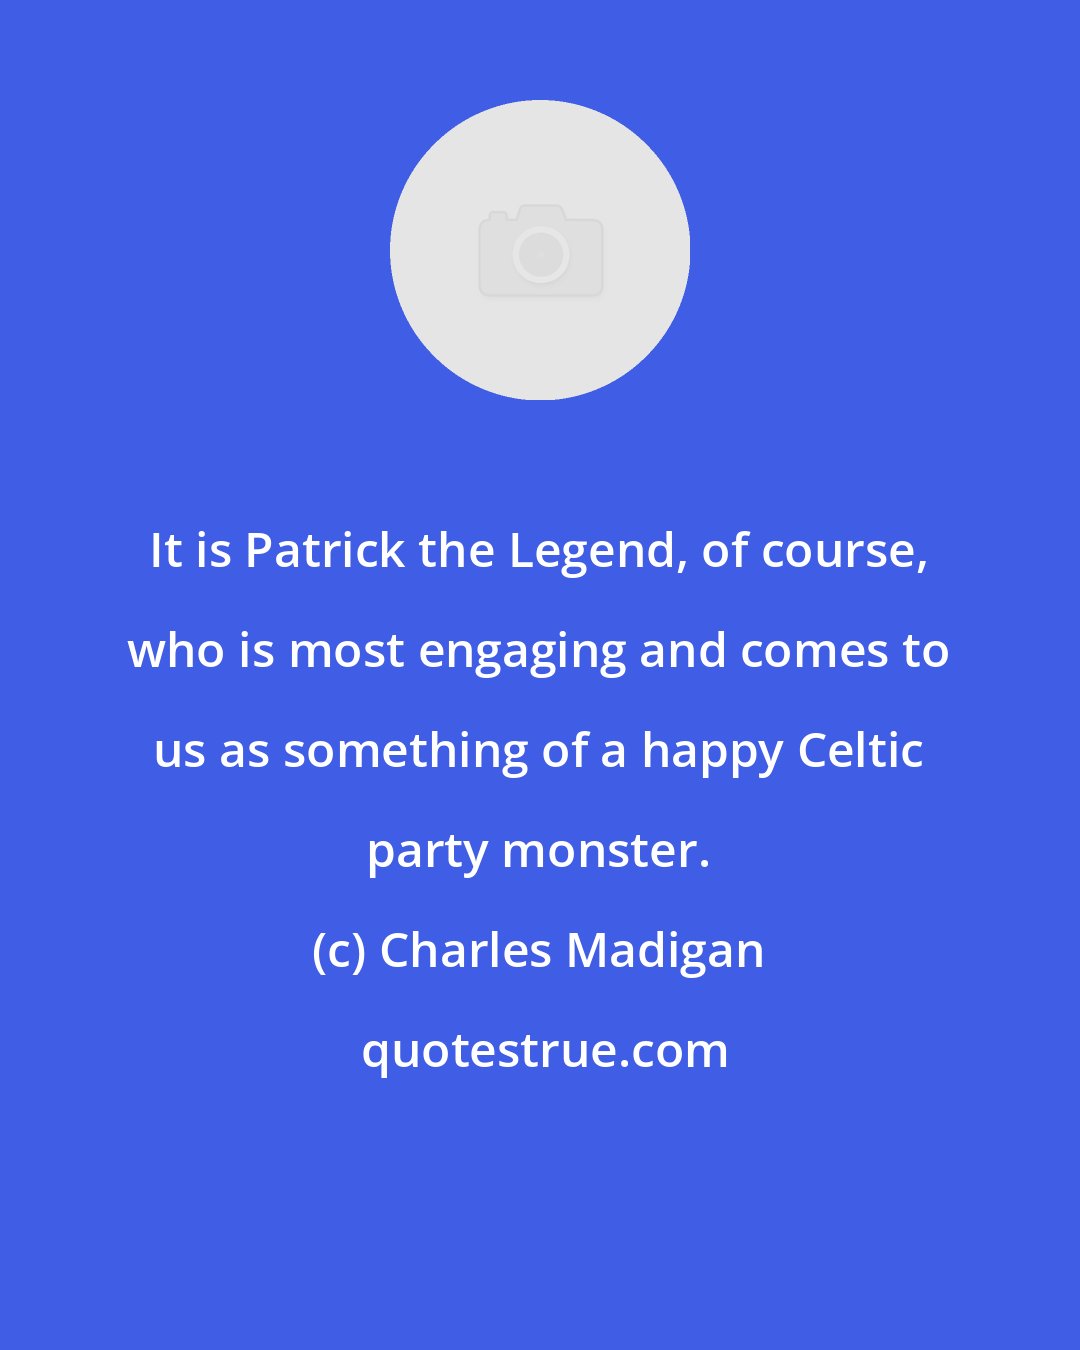 Charles Madigan: It is Patrick the Legend, of course, who is most engaging and comes to us as something of a happy Celtic party monster.